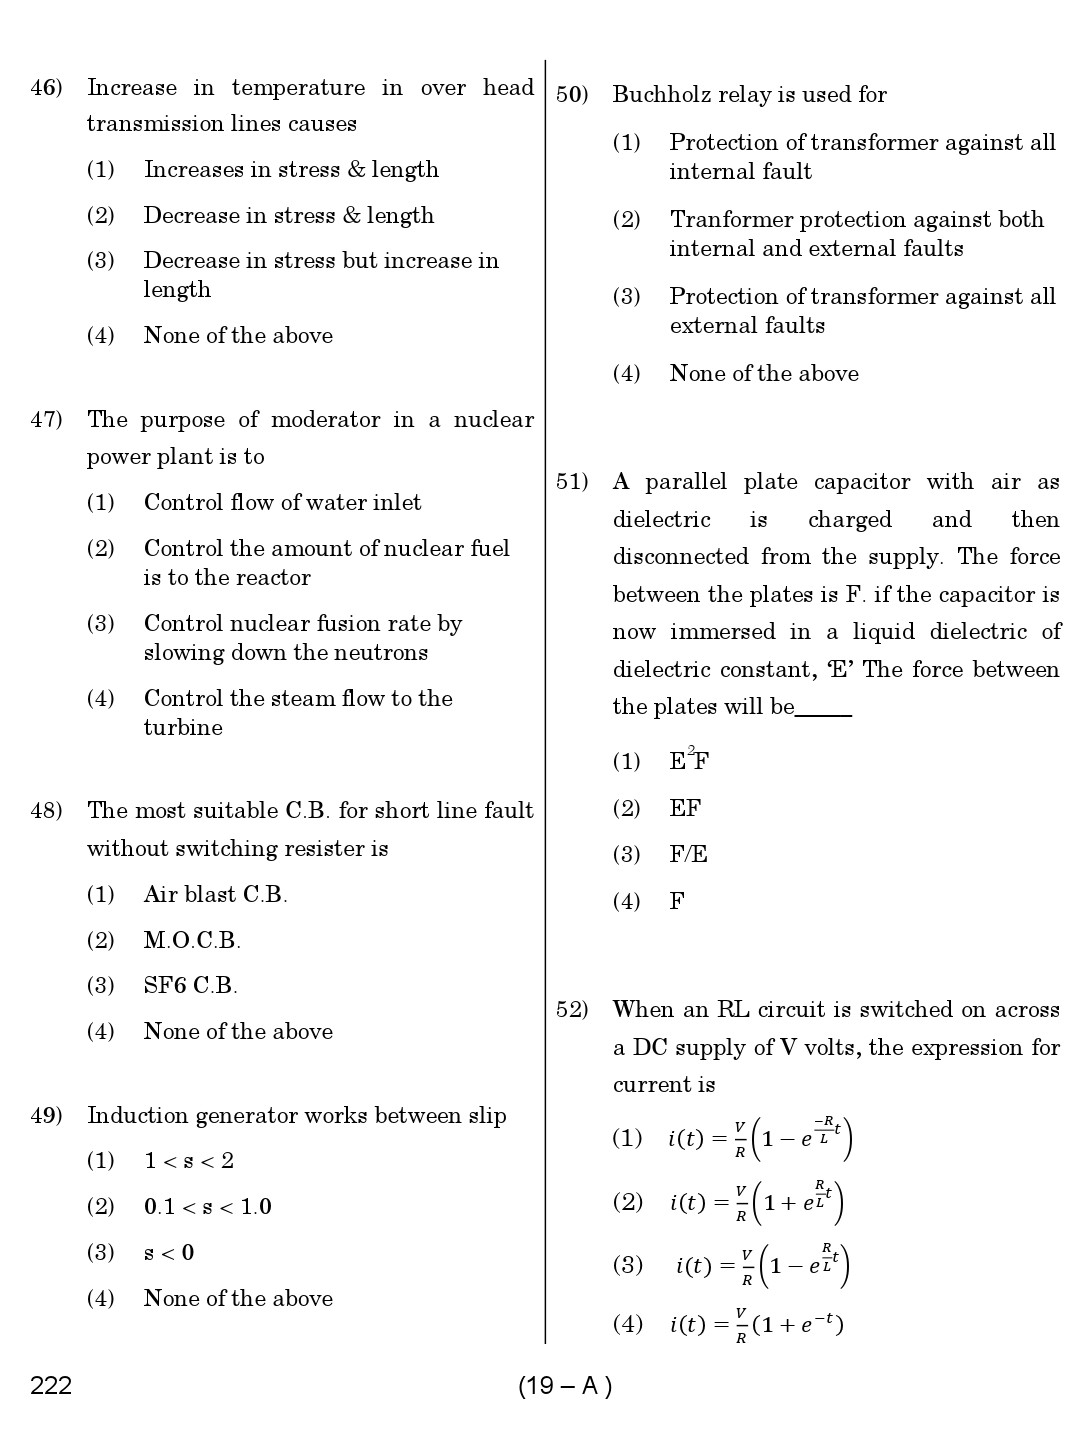 Karnataka PSC Assistant Engineer Electrical Exam Sample Question Paper 19